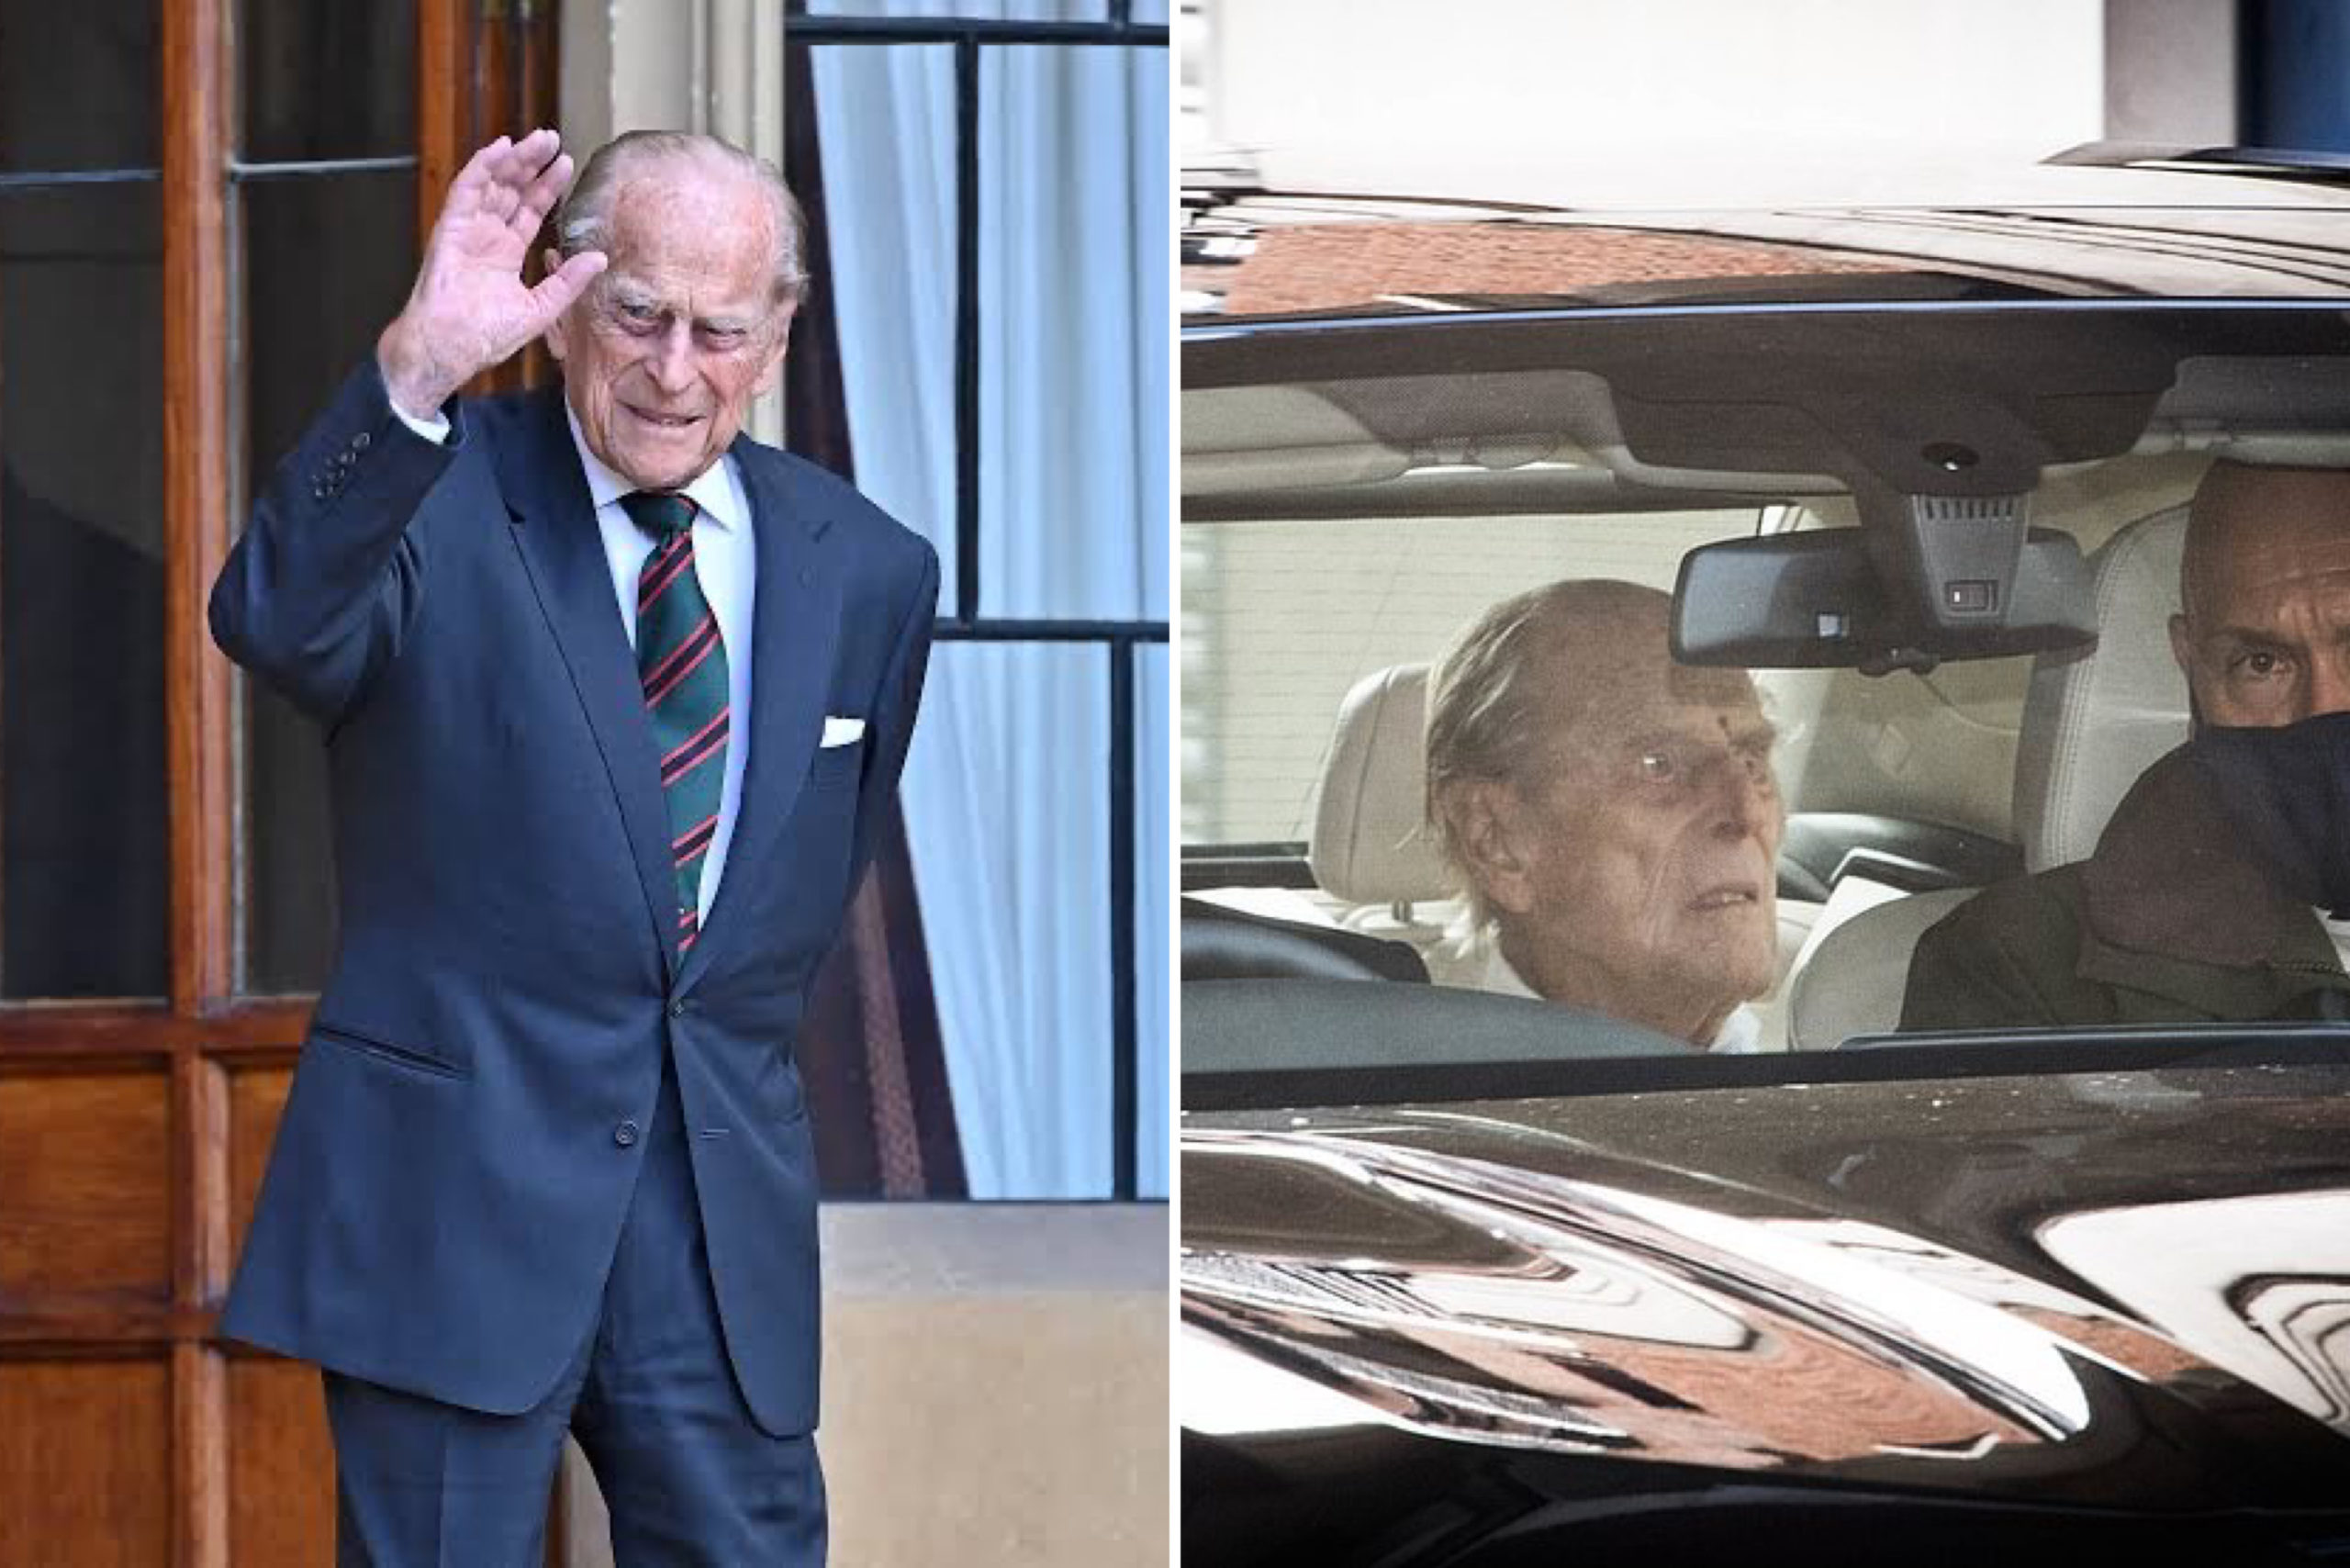 Prince Philip Leaves Hospital Two Weeks After Heart Surgery